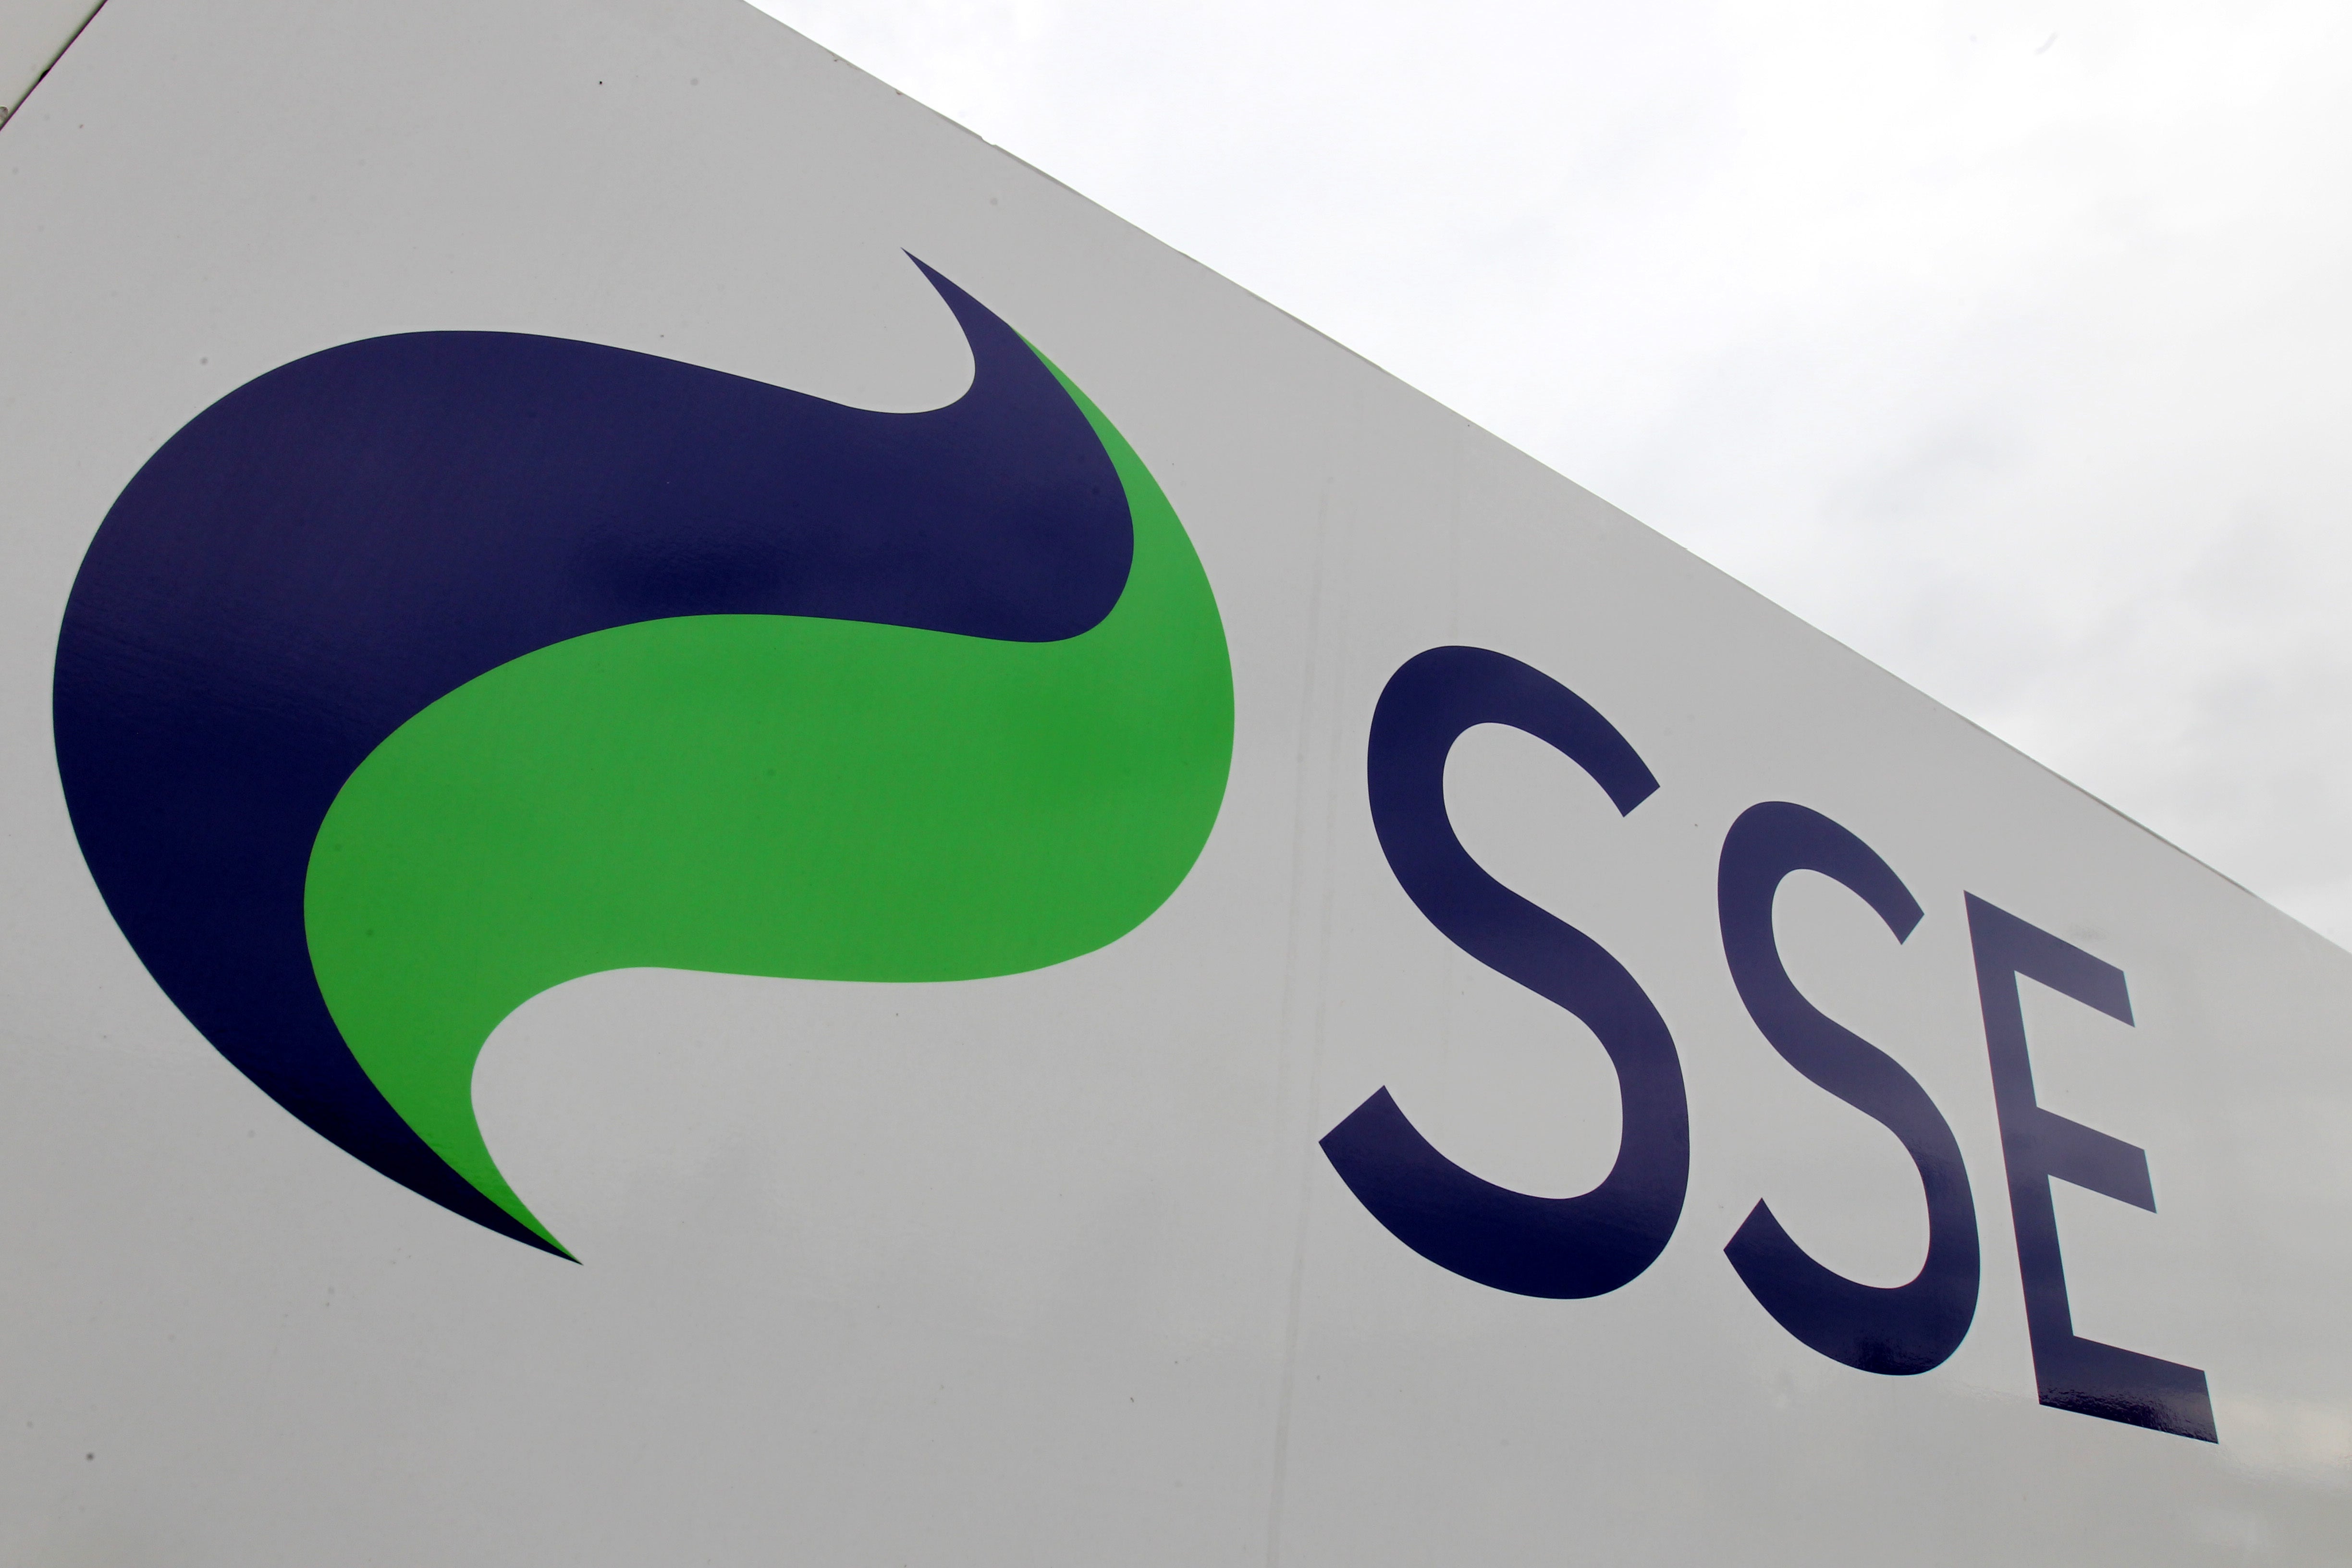 Energy supplier SSE has completed its programme of disposals after shelling its stake in SGN (Andrew Milligan/PA)